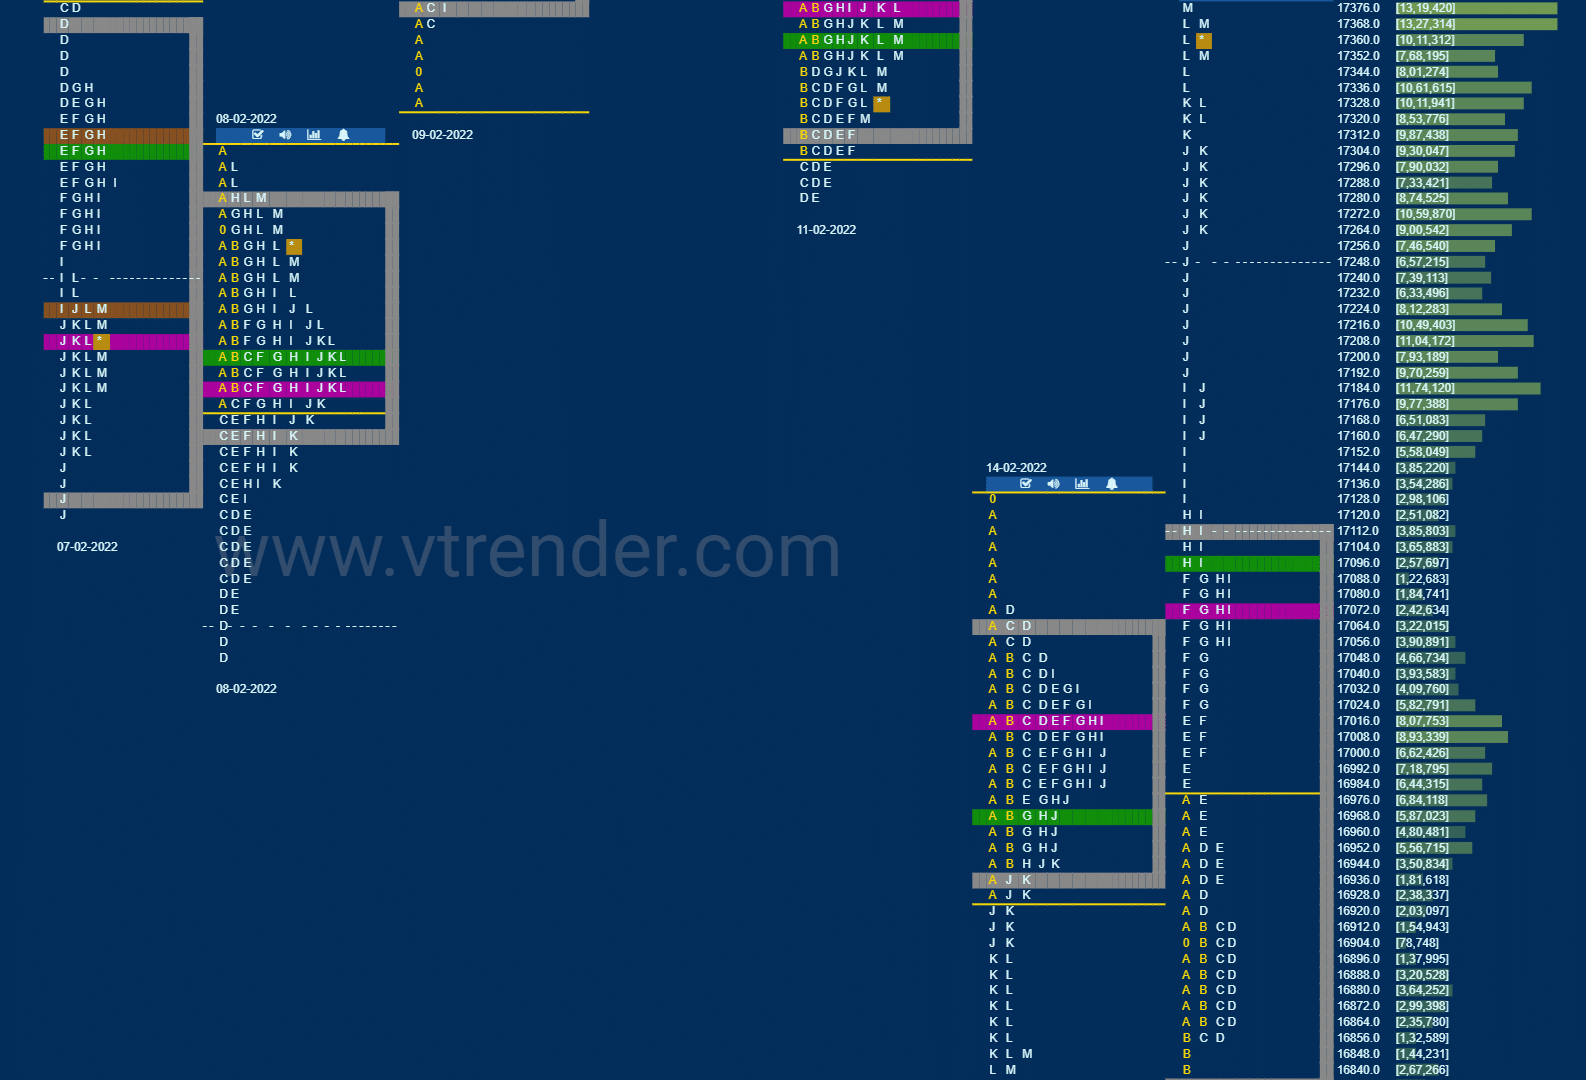 Nf 10 Market Profile Analysis Dated 15Th February 2022 Banknifty Futures, Charts, Day Trading, Intraday Trading, Intraday Trading Strategies, Market Profile, Market Profile Trading Strategies, Nifty Futures, Order Flow Analysis, Support And Resistance, Technical Analysis, Trading Strategies, Volume Profile Trading